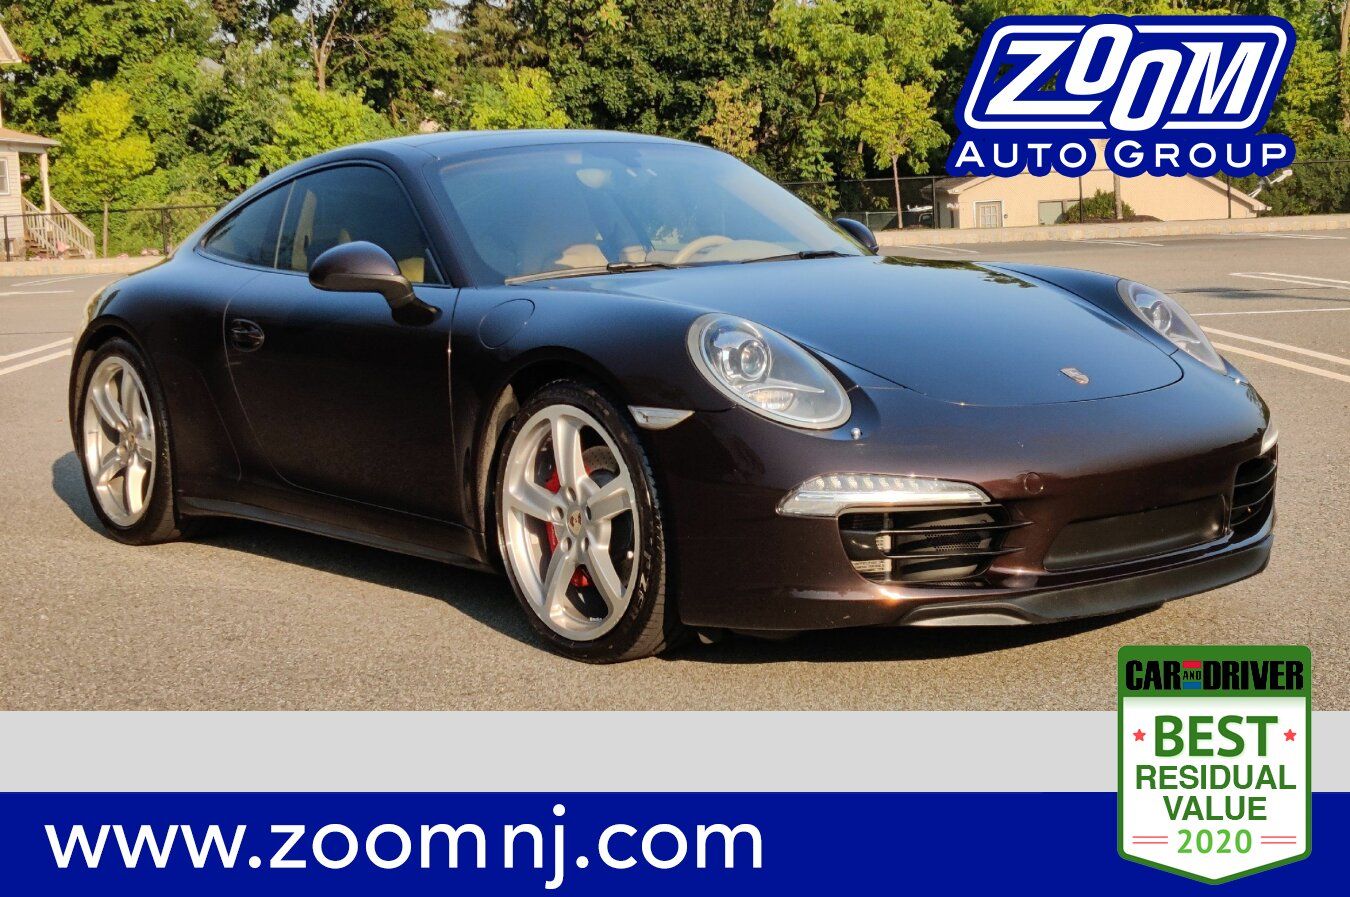 2013 Porsche 911 Carrera 4S | Zoom Auto Group - Used Cars New Jersey